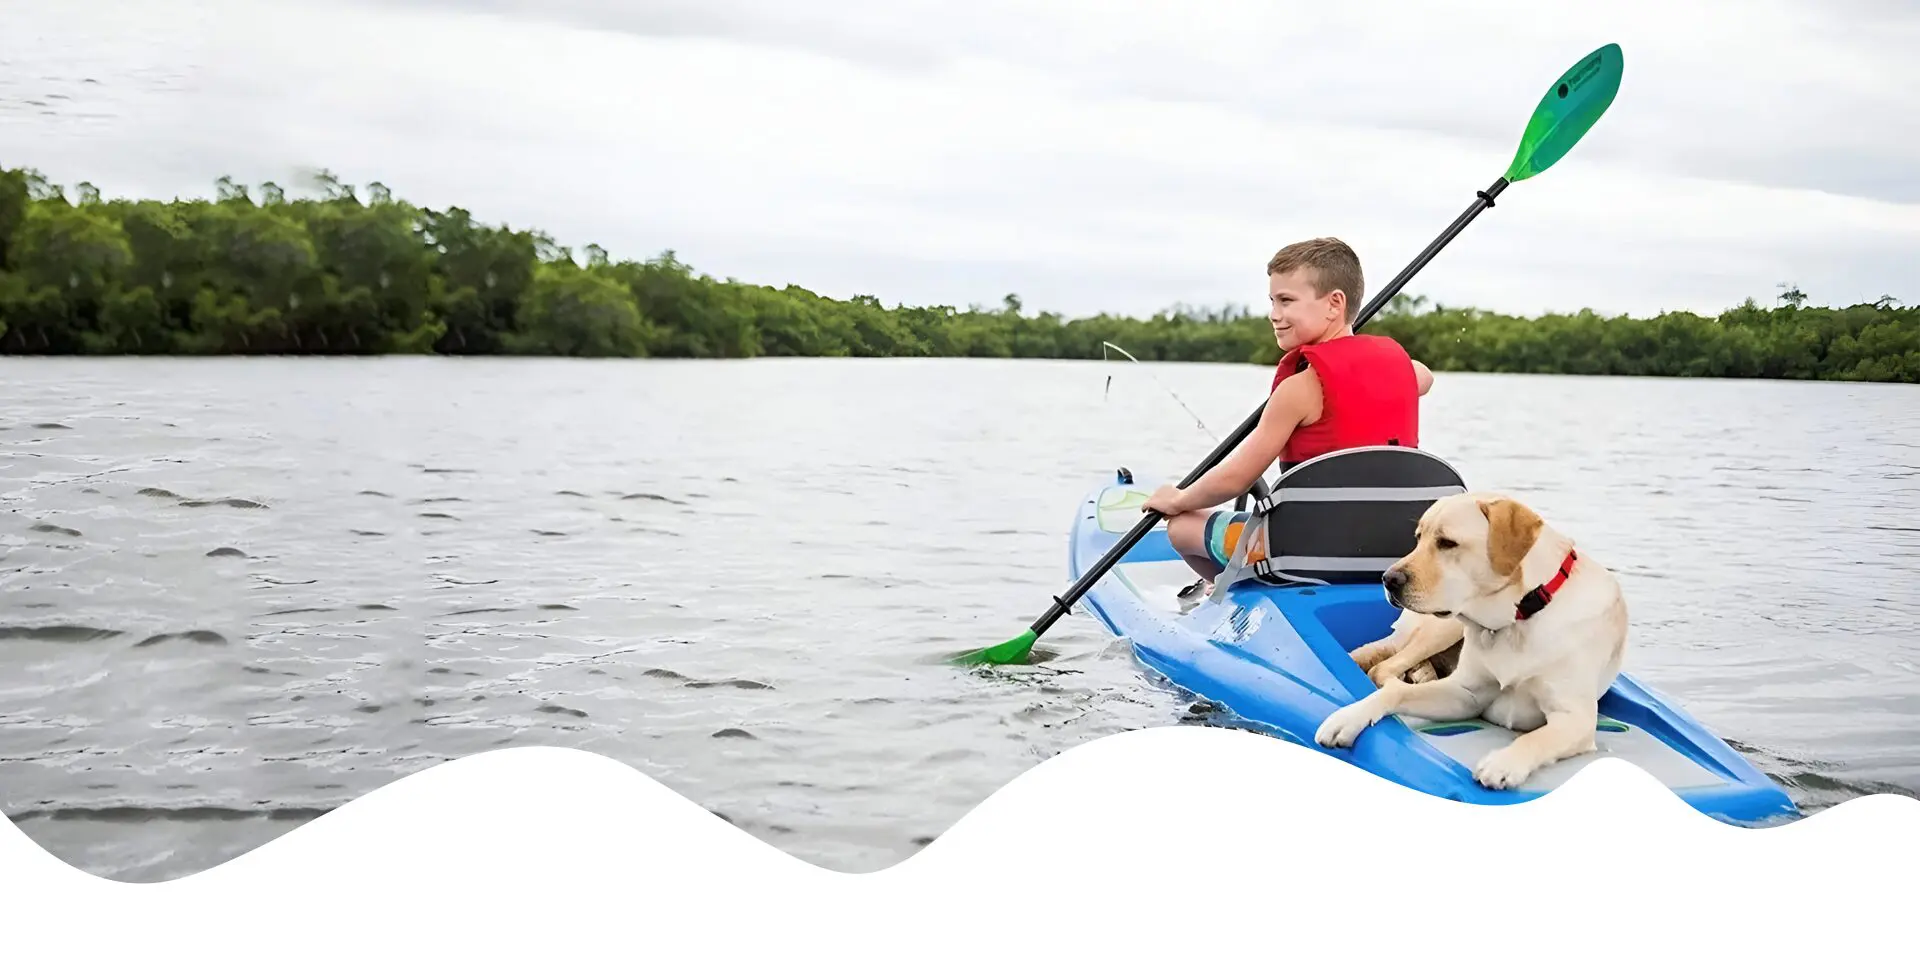 A boy and his dog are kayaking on the lake.